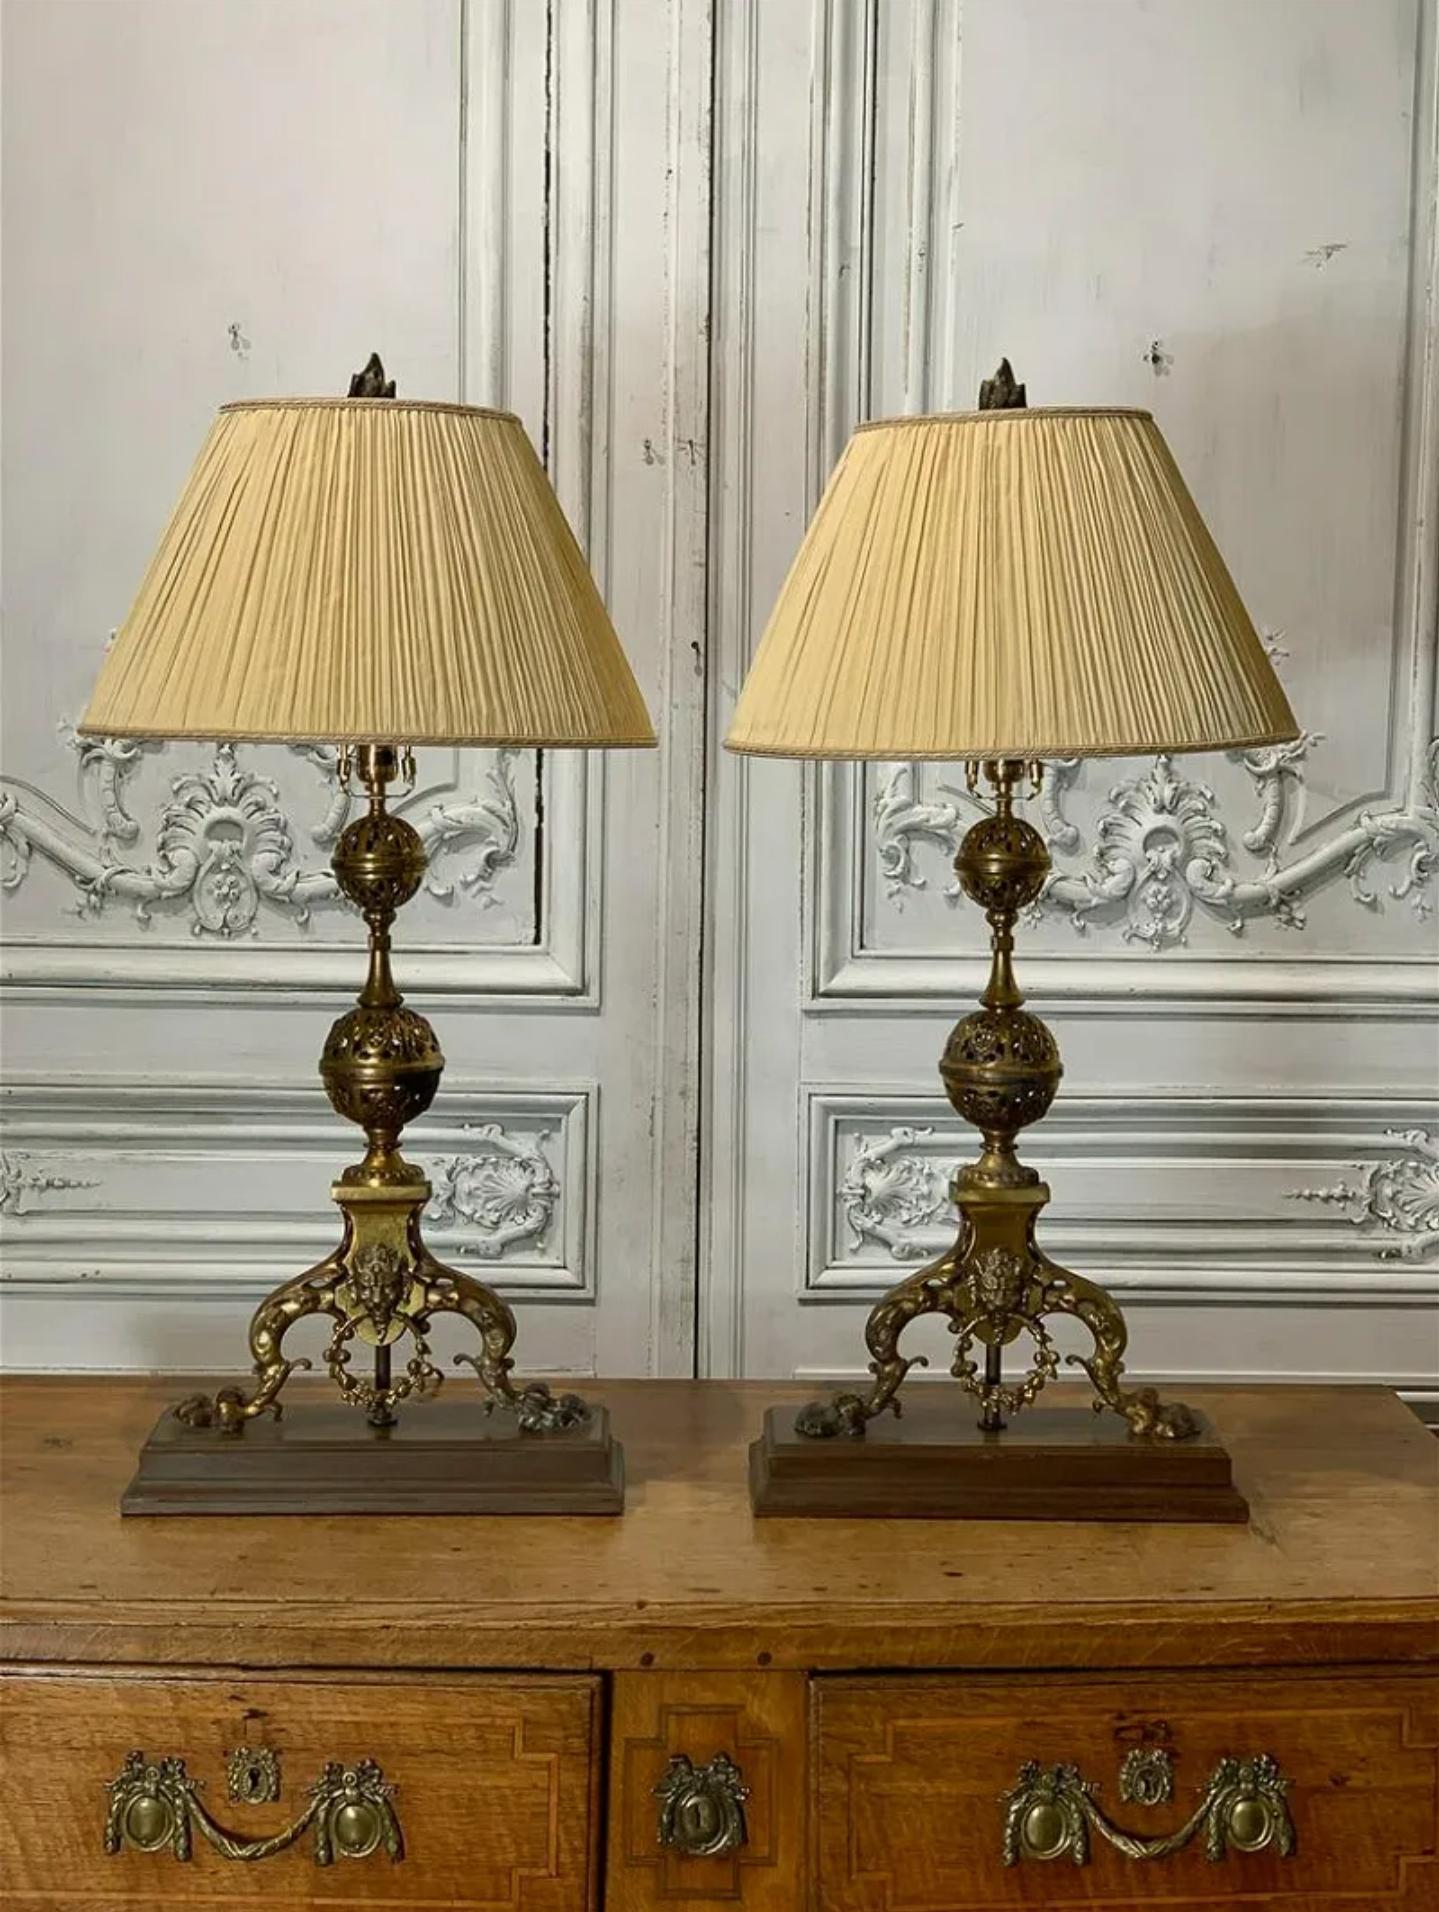 19th Century French Gothic Revival Andirons Mounted As Table Lamps - A Pair  For Sale 10